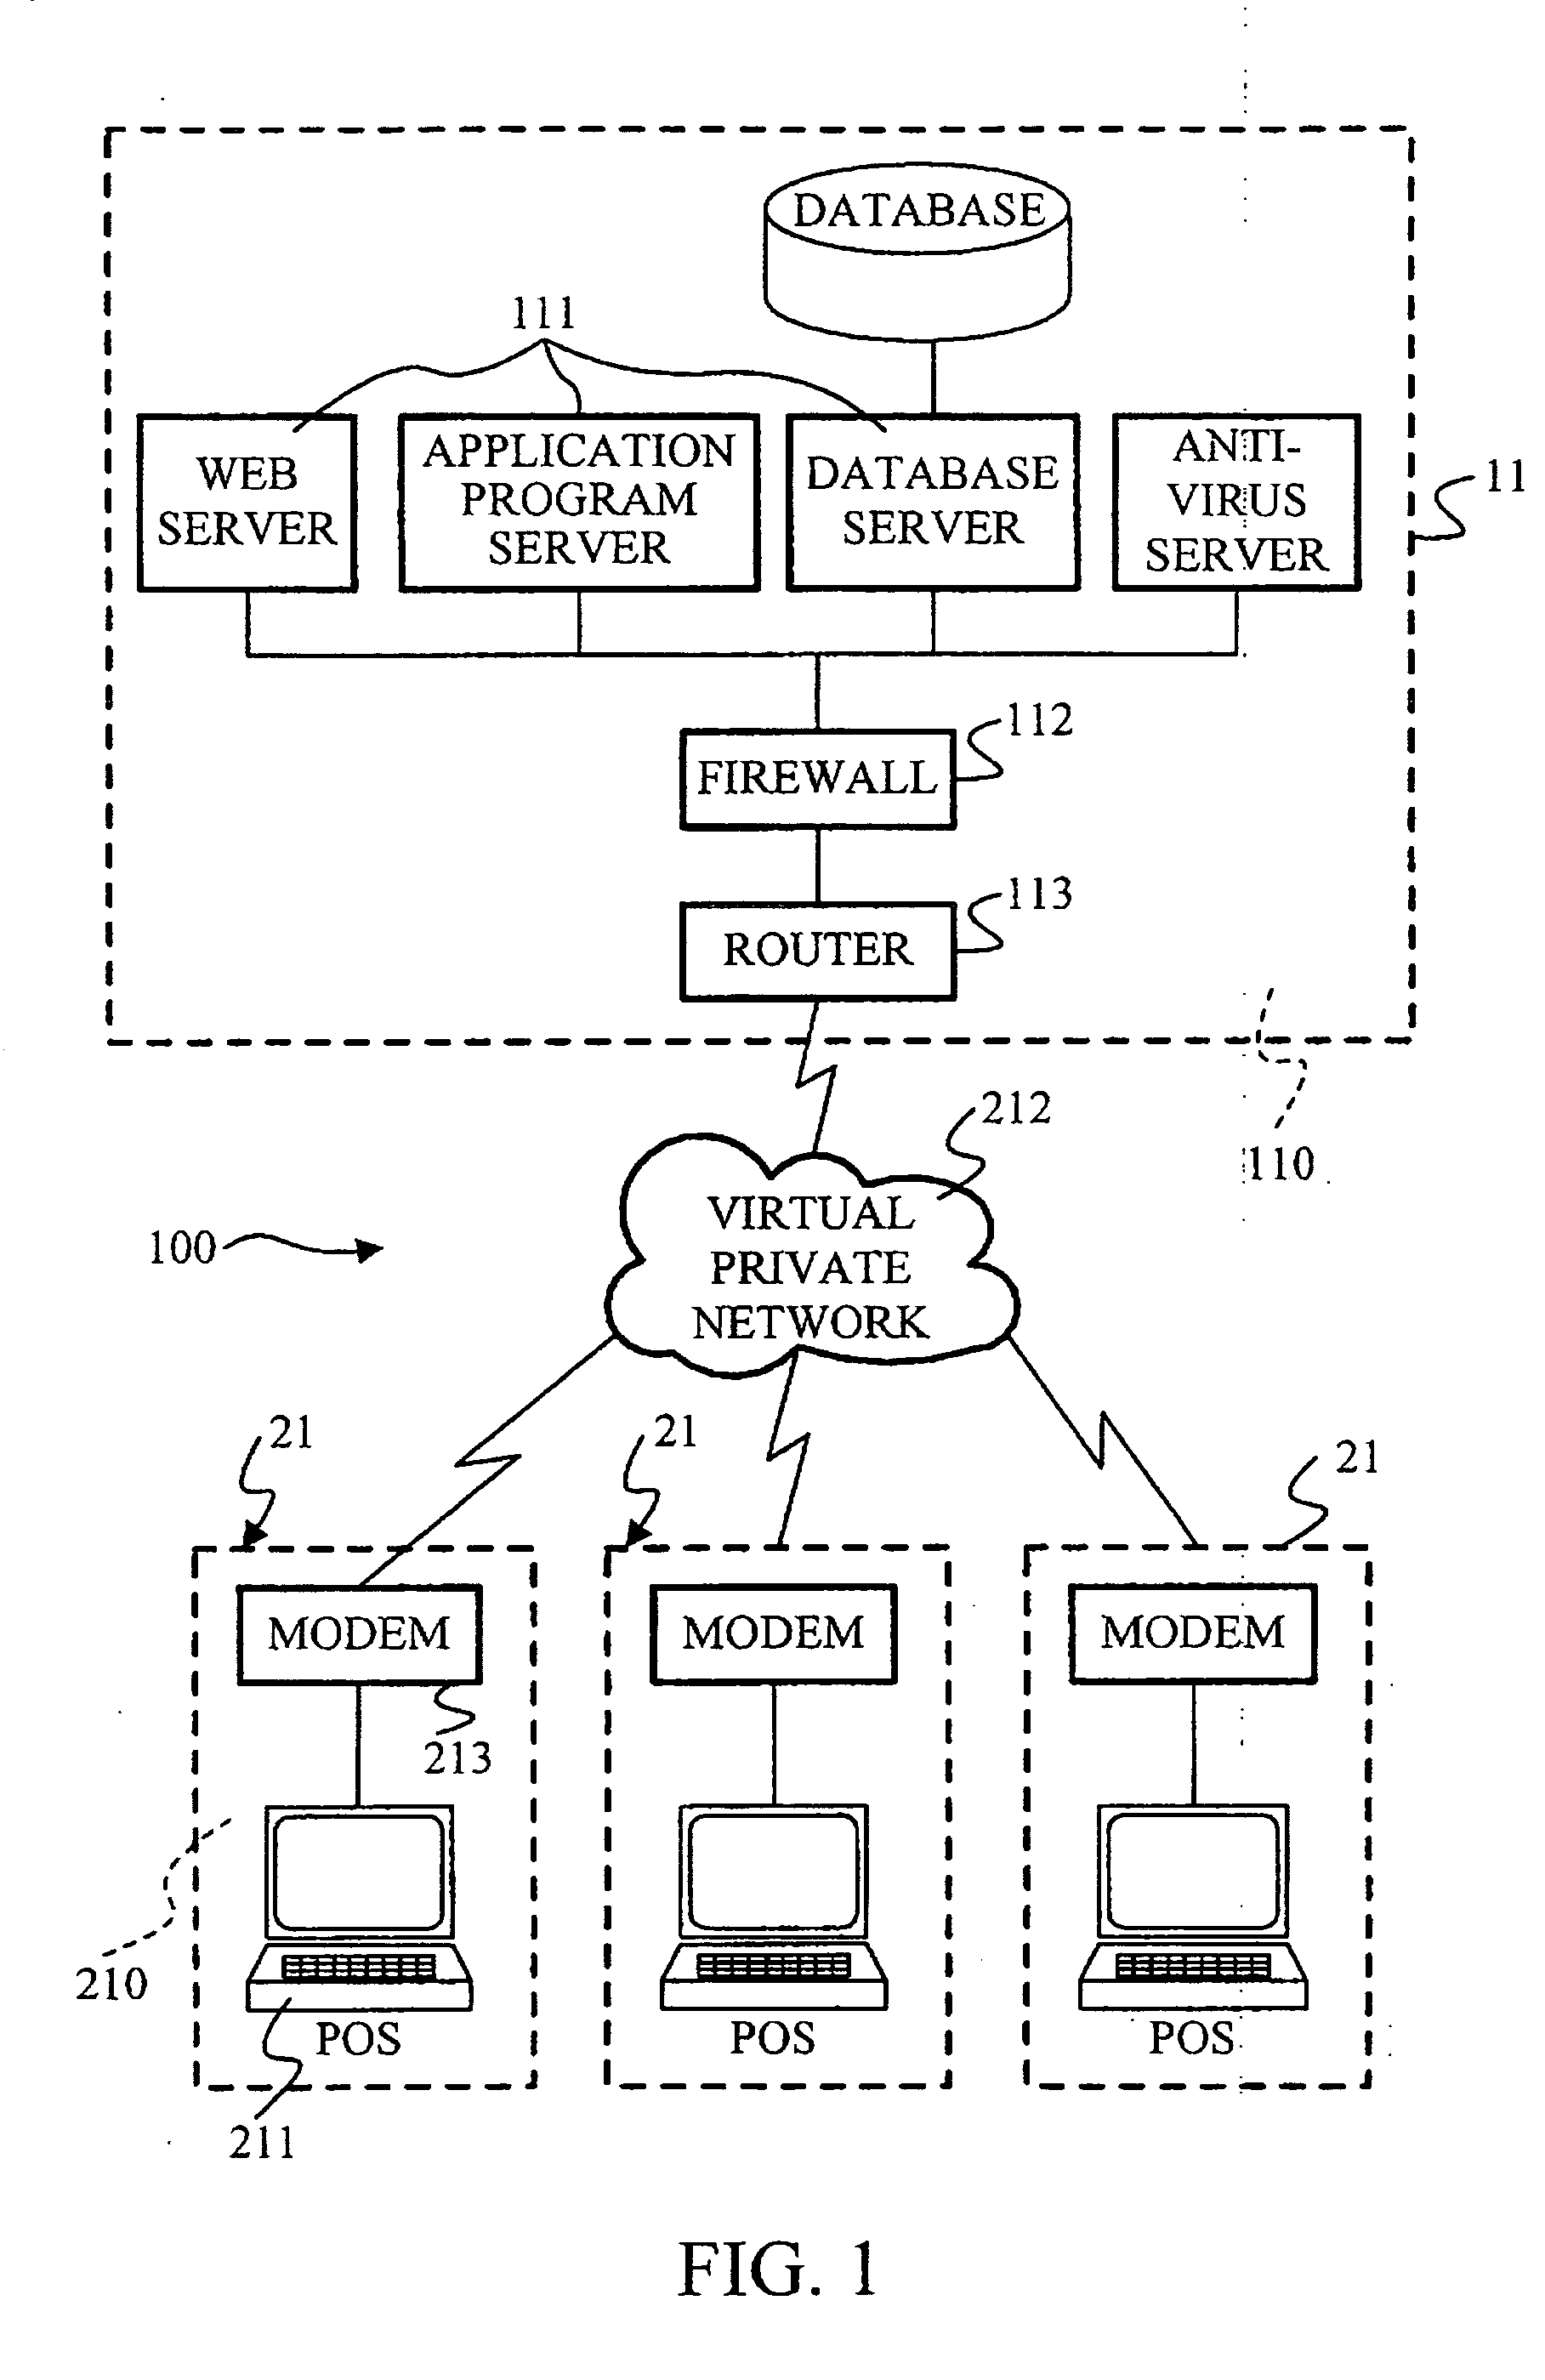 Method and system for calculating reward earned from transactions for voucher or stored value for transactions and method of redeeming the voucher or stored value